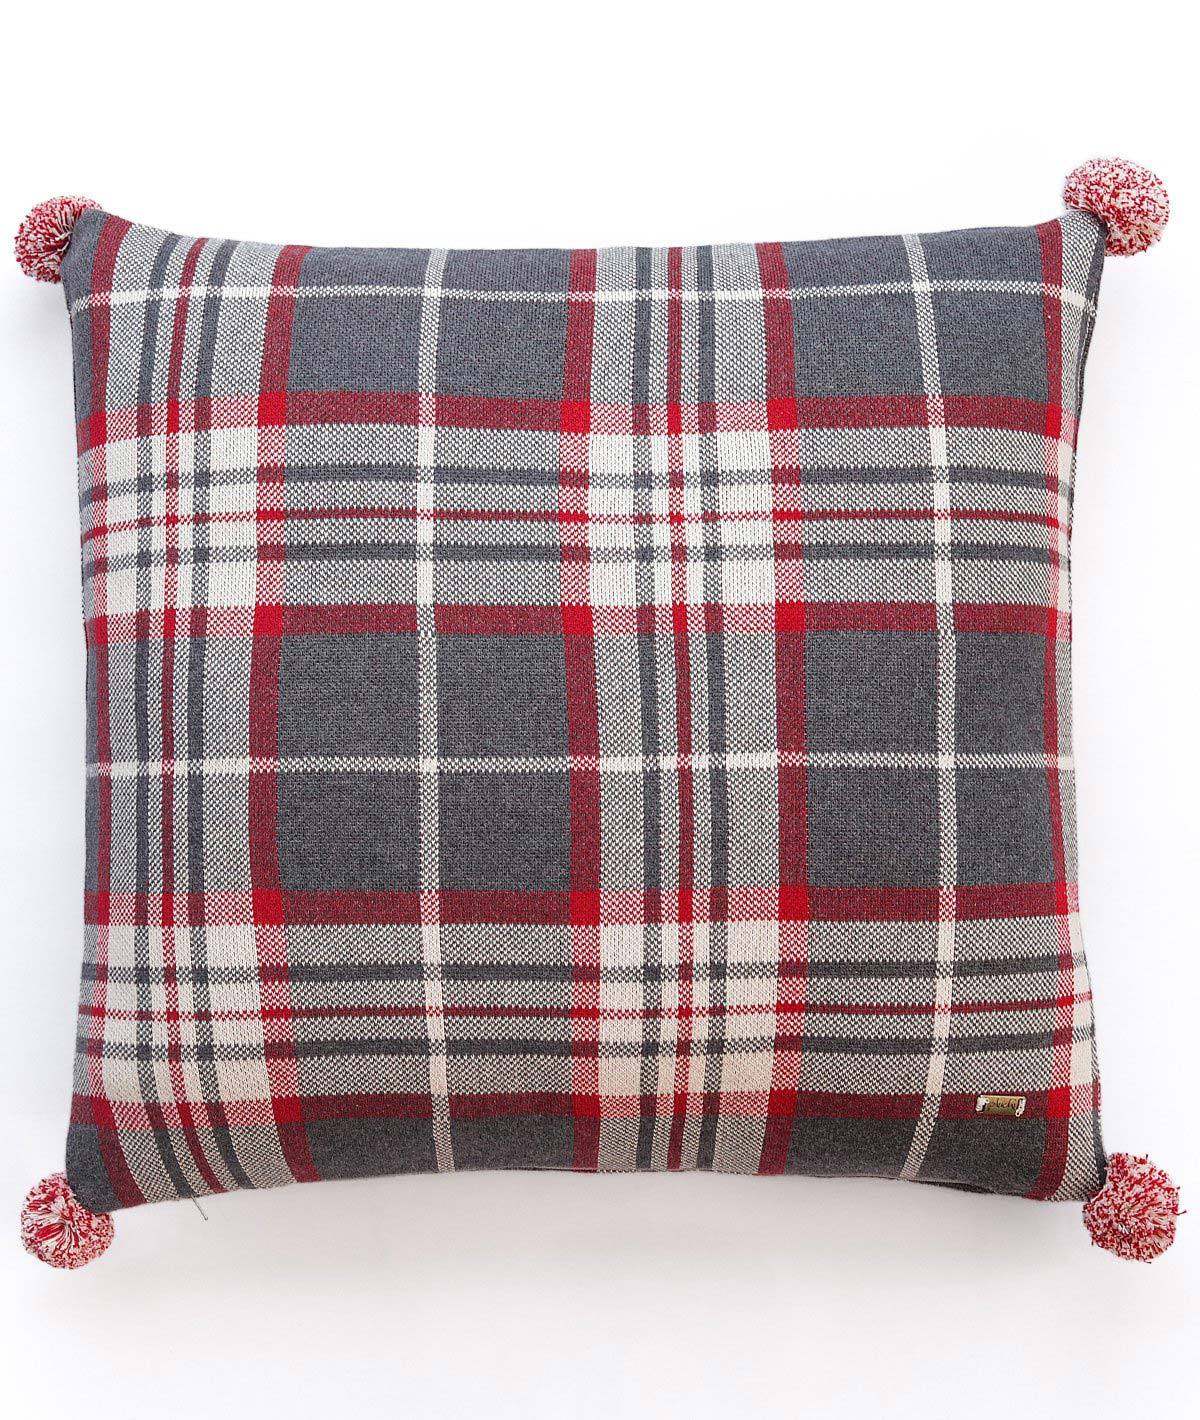 Tartan Plaid Cotton Knitted Decorative Multicolor 20 x 20 Inches Cushion Cover